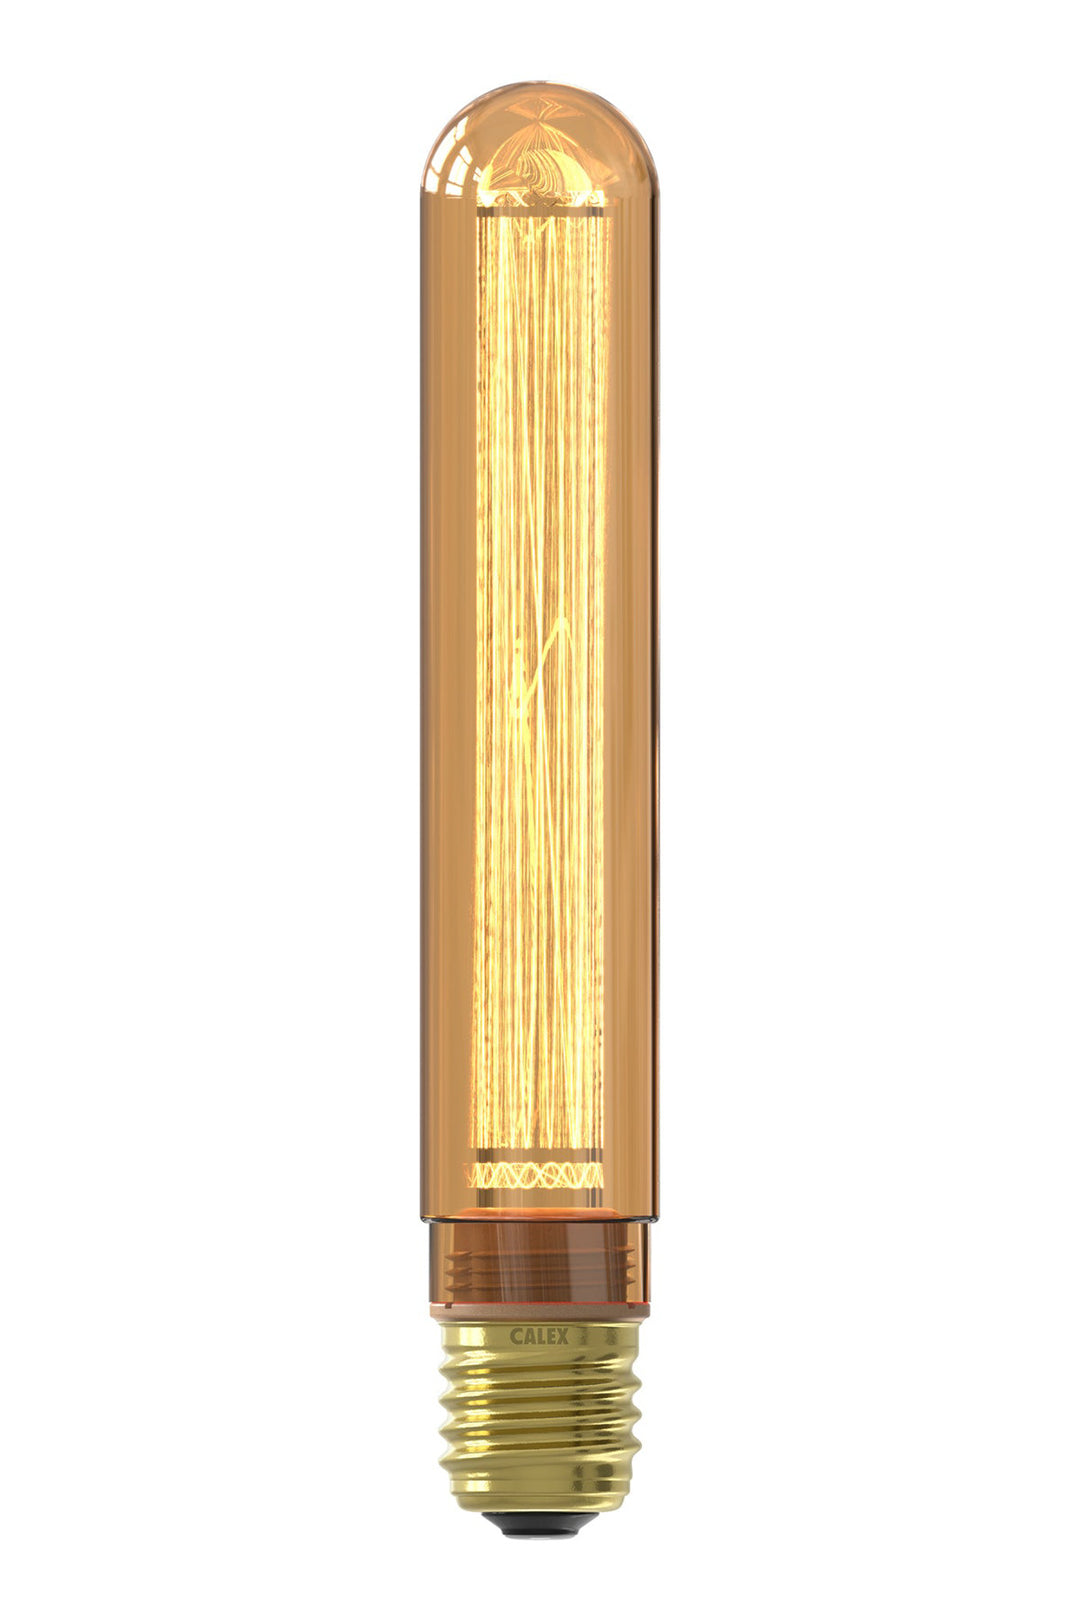 Calex LED Glass Fibre Tube T30x185 Gold, E27, Dimmable with LED Dimmer 1201001700